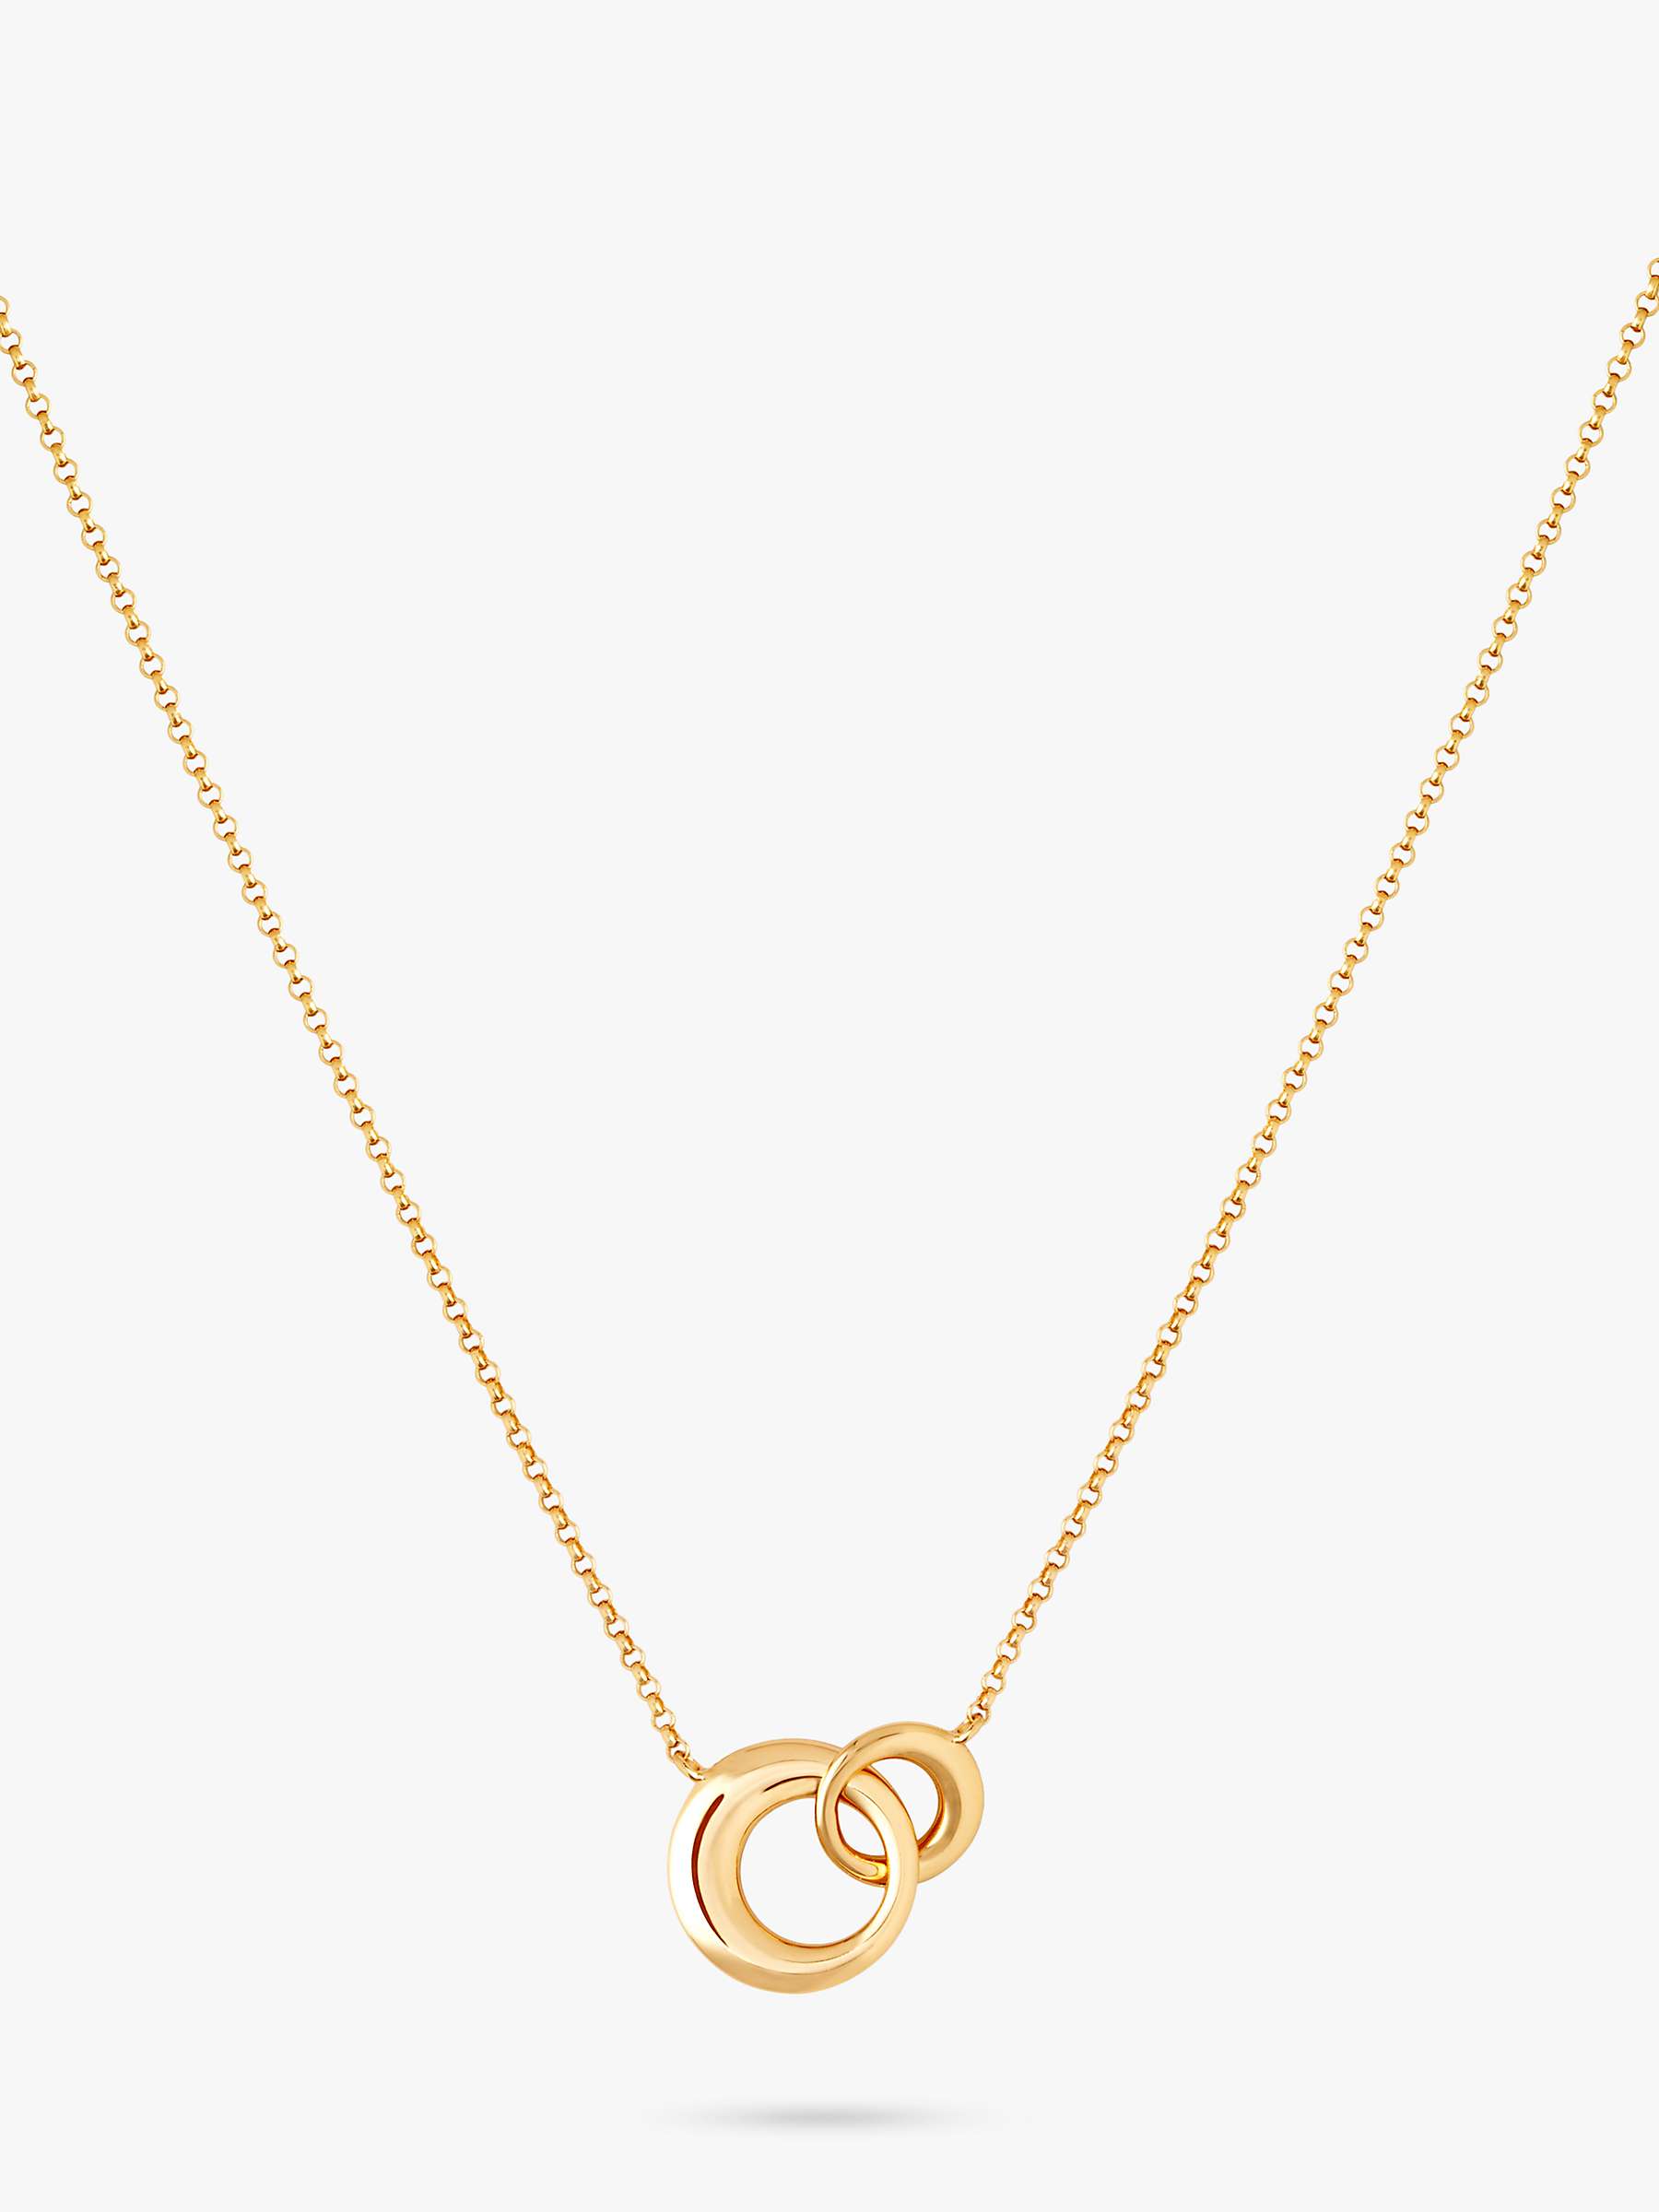 Buy Astrid & Miyu Connection Link Pendant Necklace, Gold Online at johnlewis.com